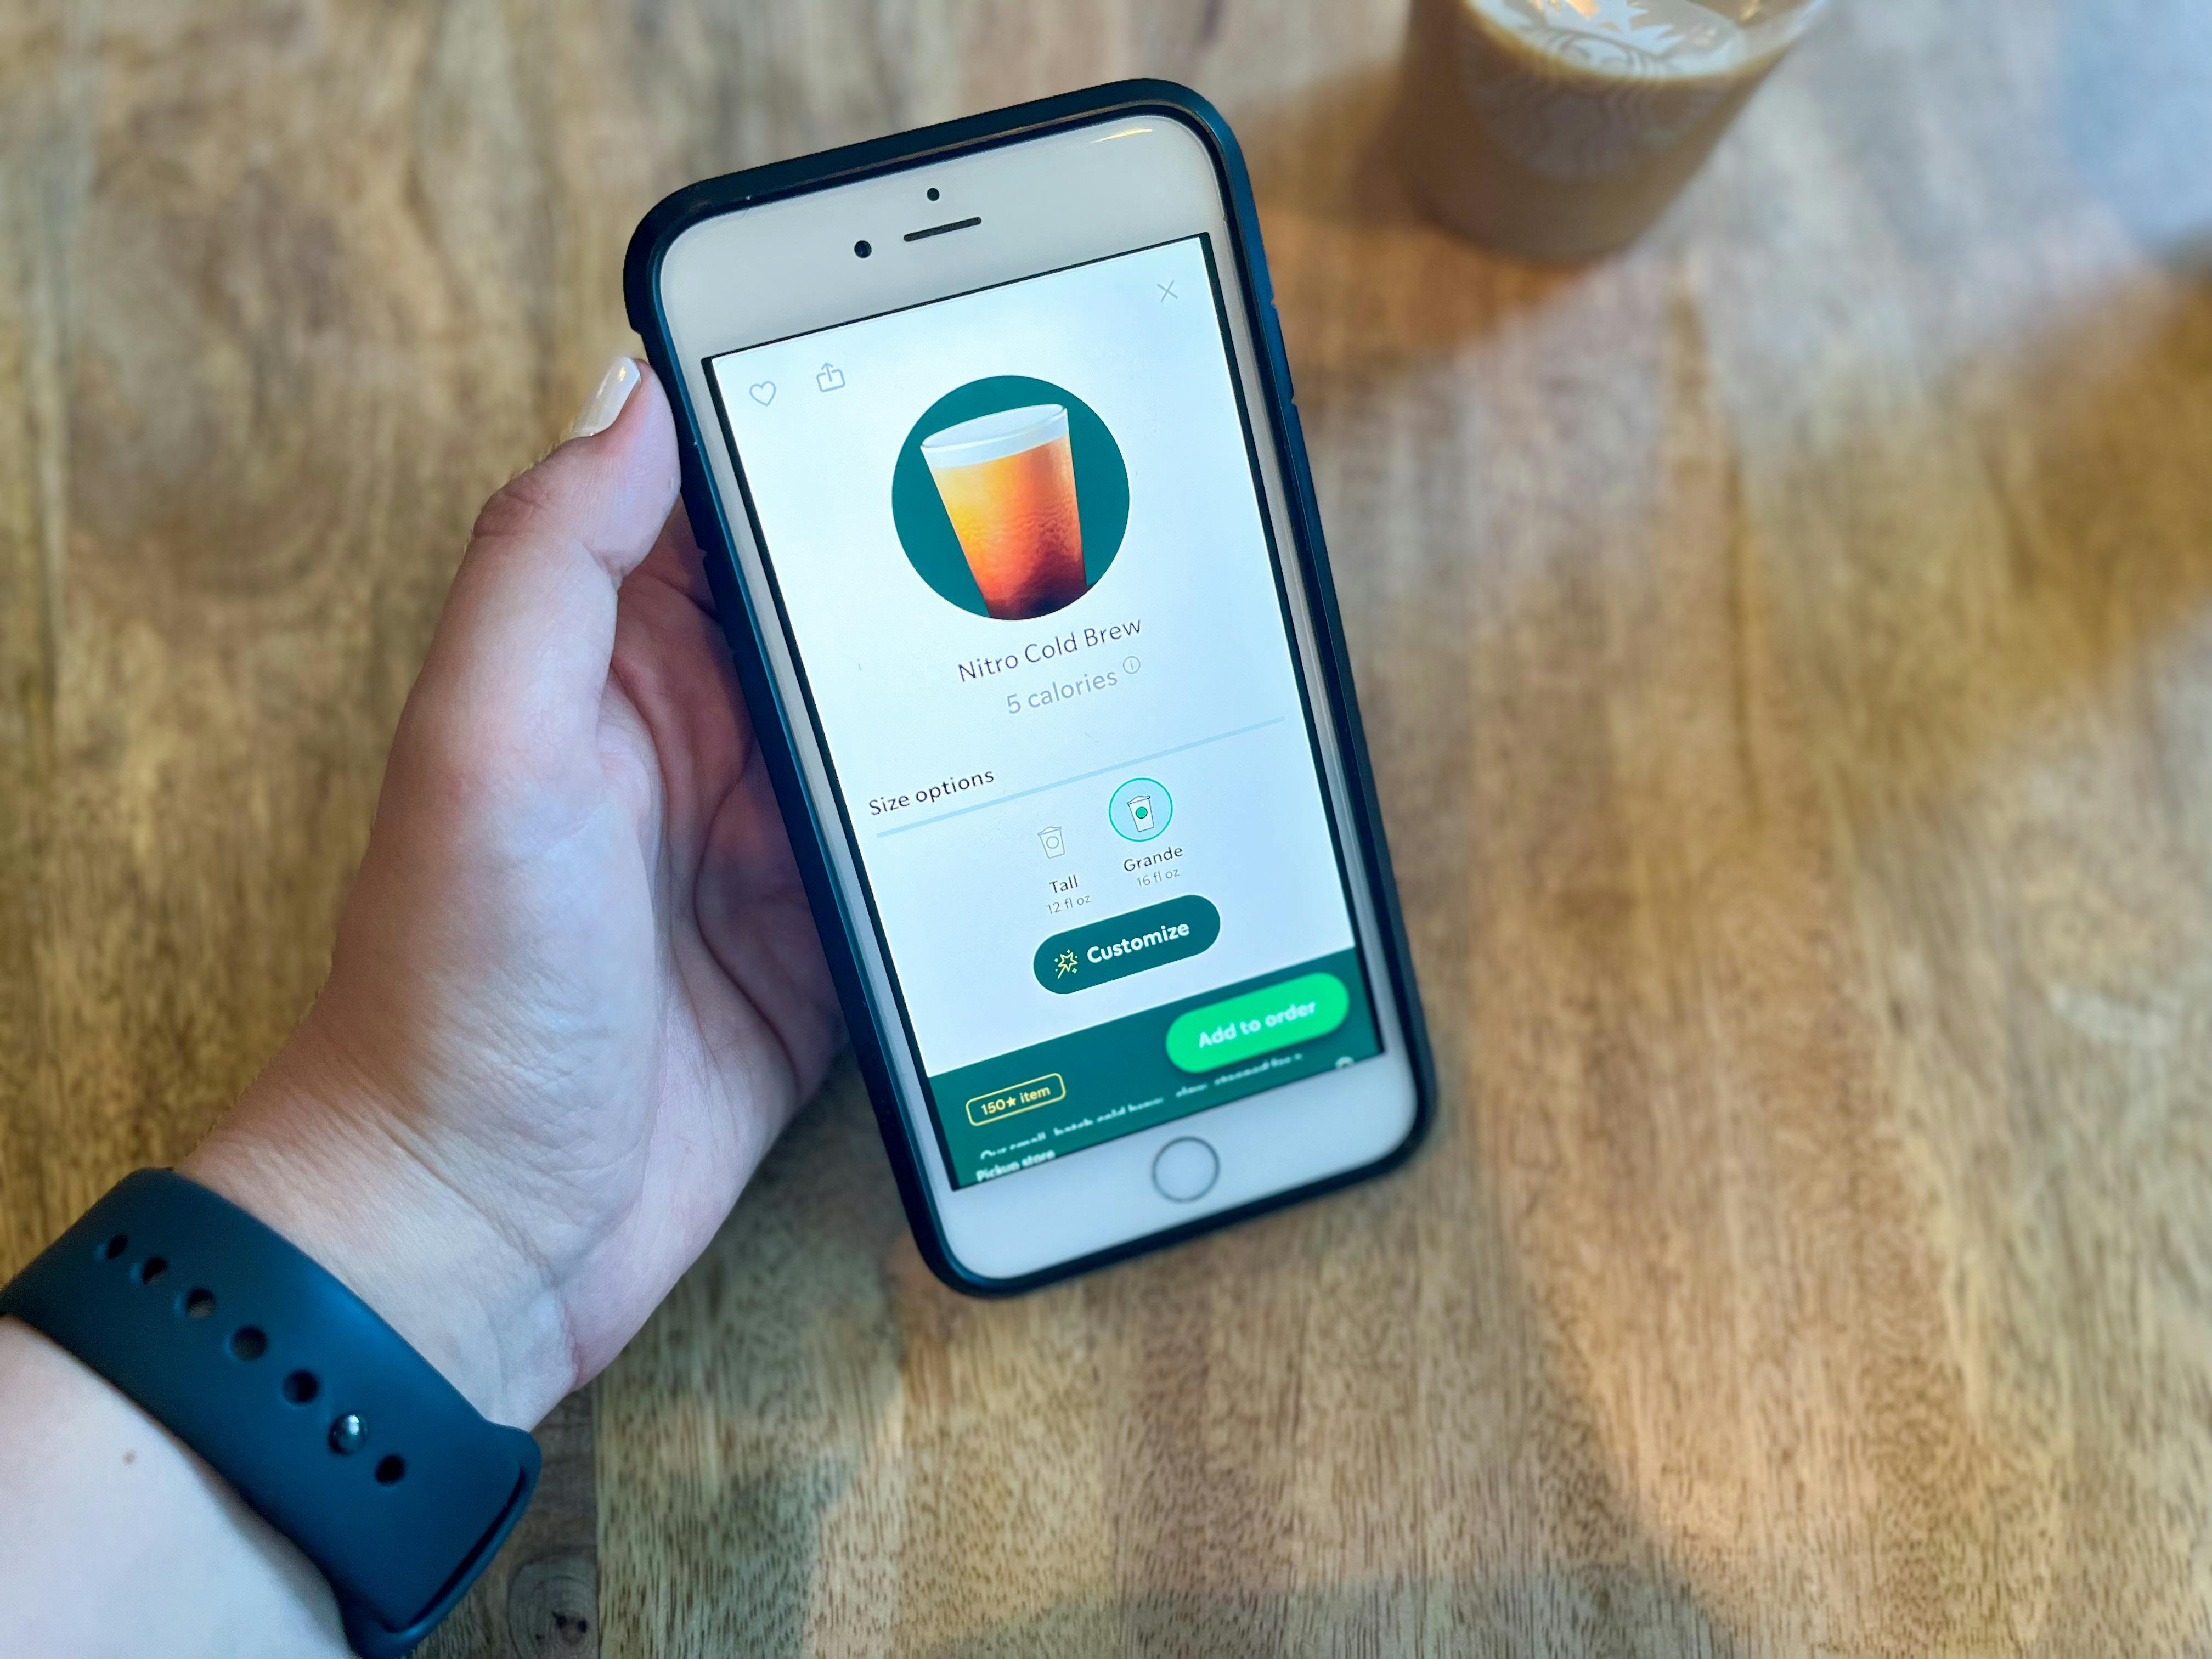 A person's hand holding an iPhone displaying the Starbucks app's page to order a Grande Nitro Cold Brew next to a Starbucks cup.